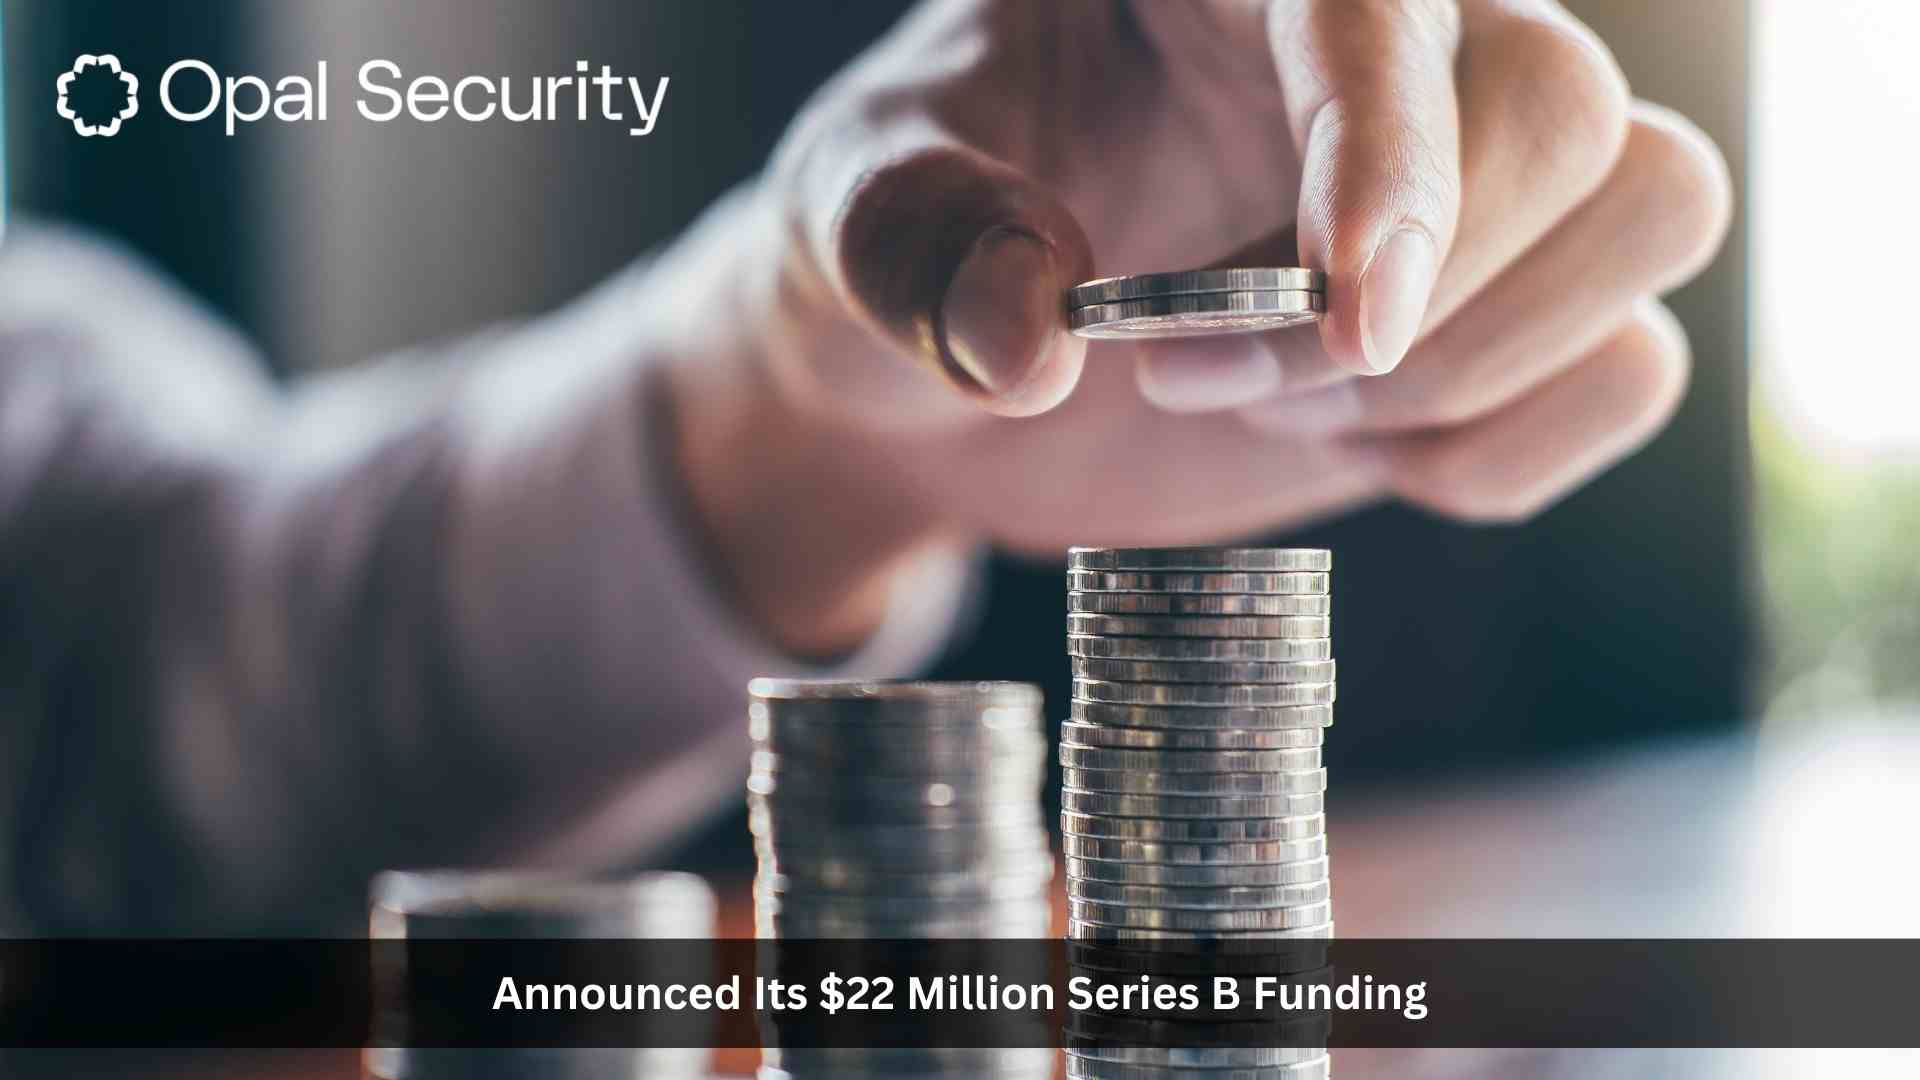 Opal Security Raises $22M in Series B Funding to Expand Next-Generation Identity Security Platform